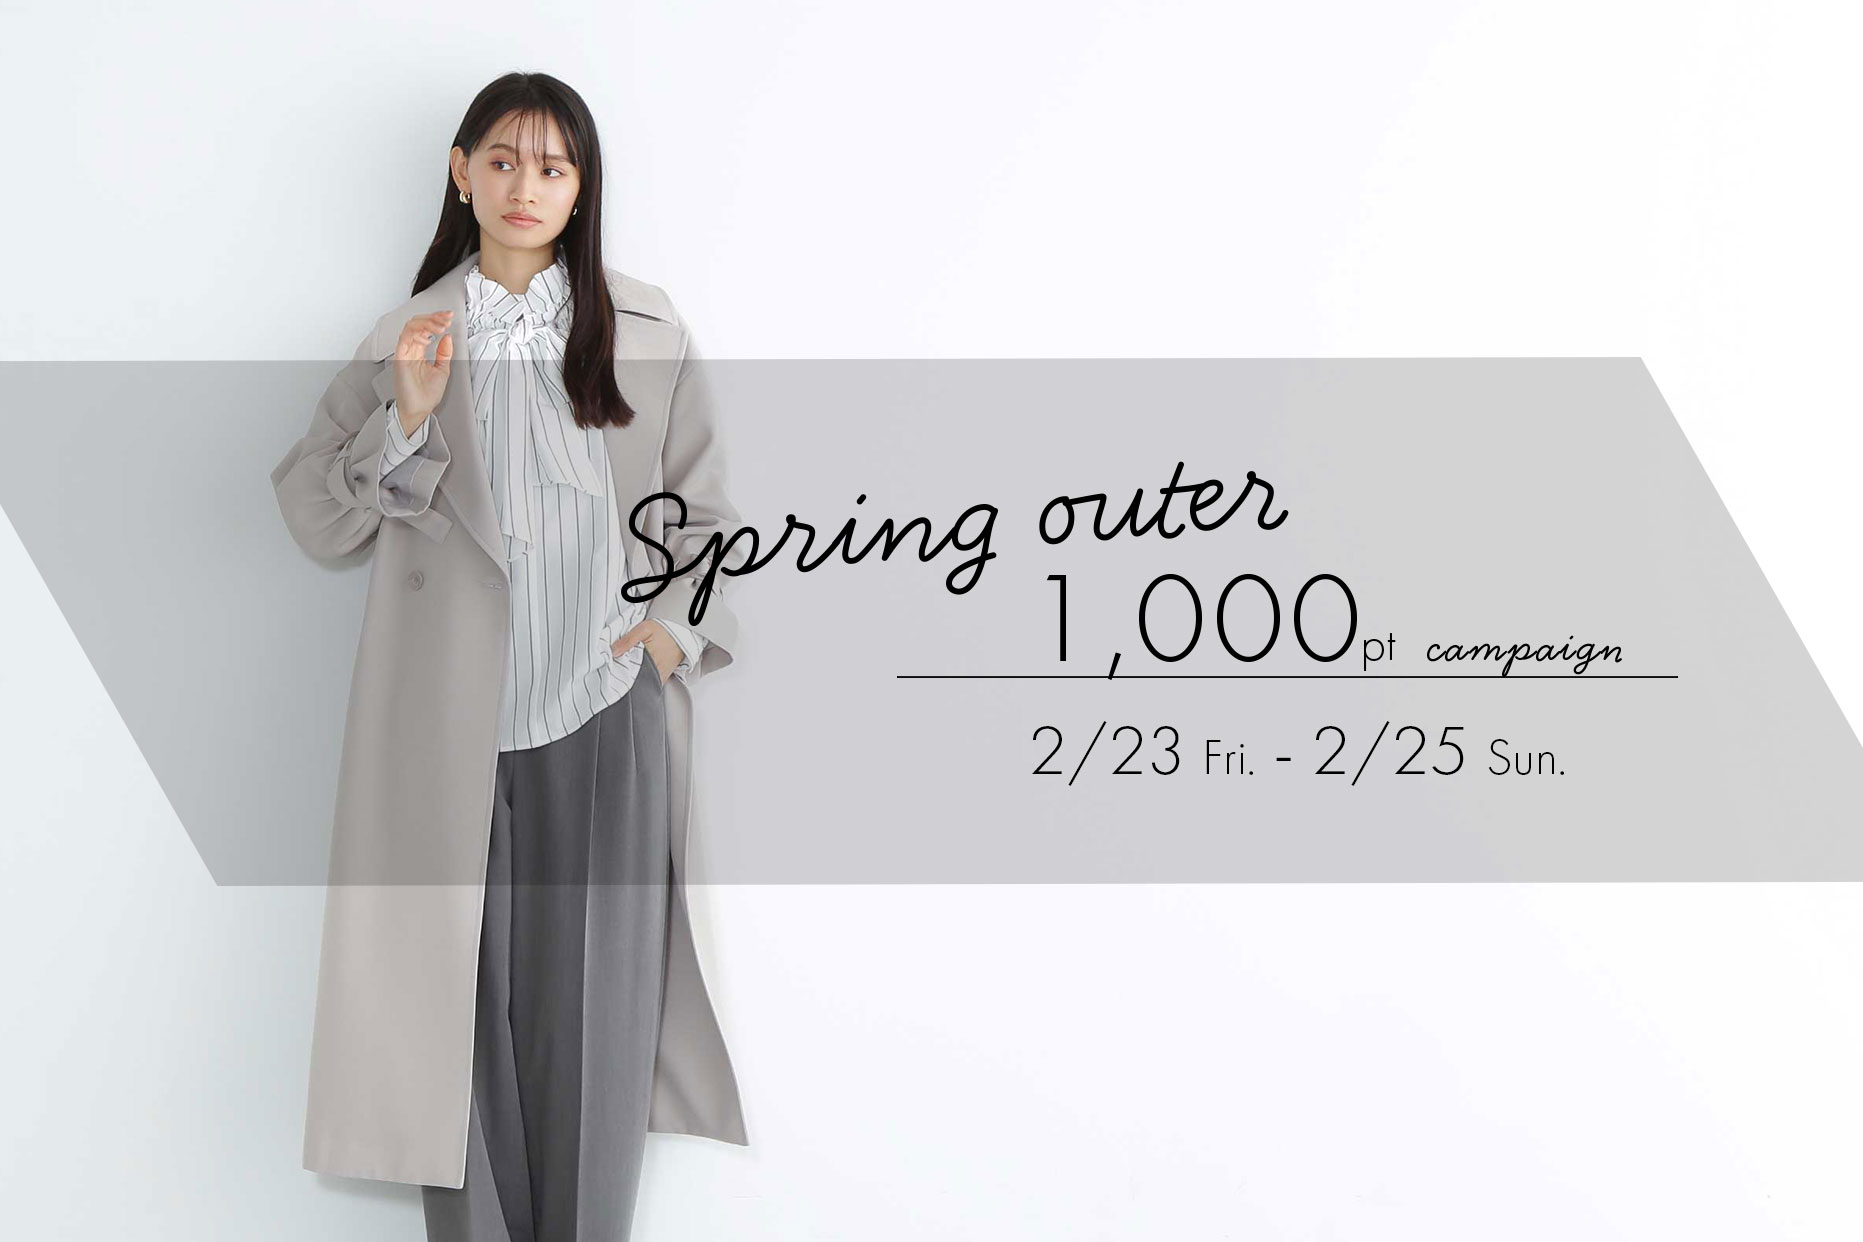 【Spring outer】1000 point Campaign